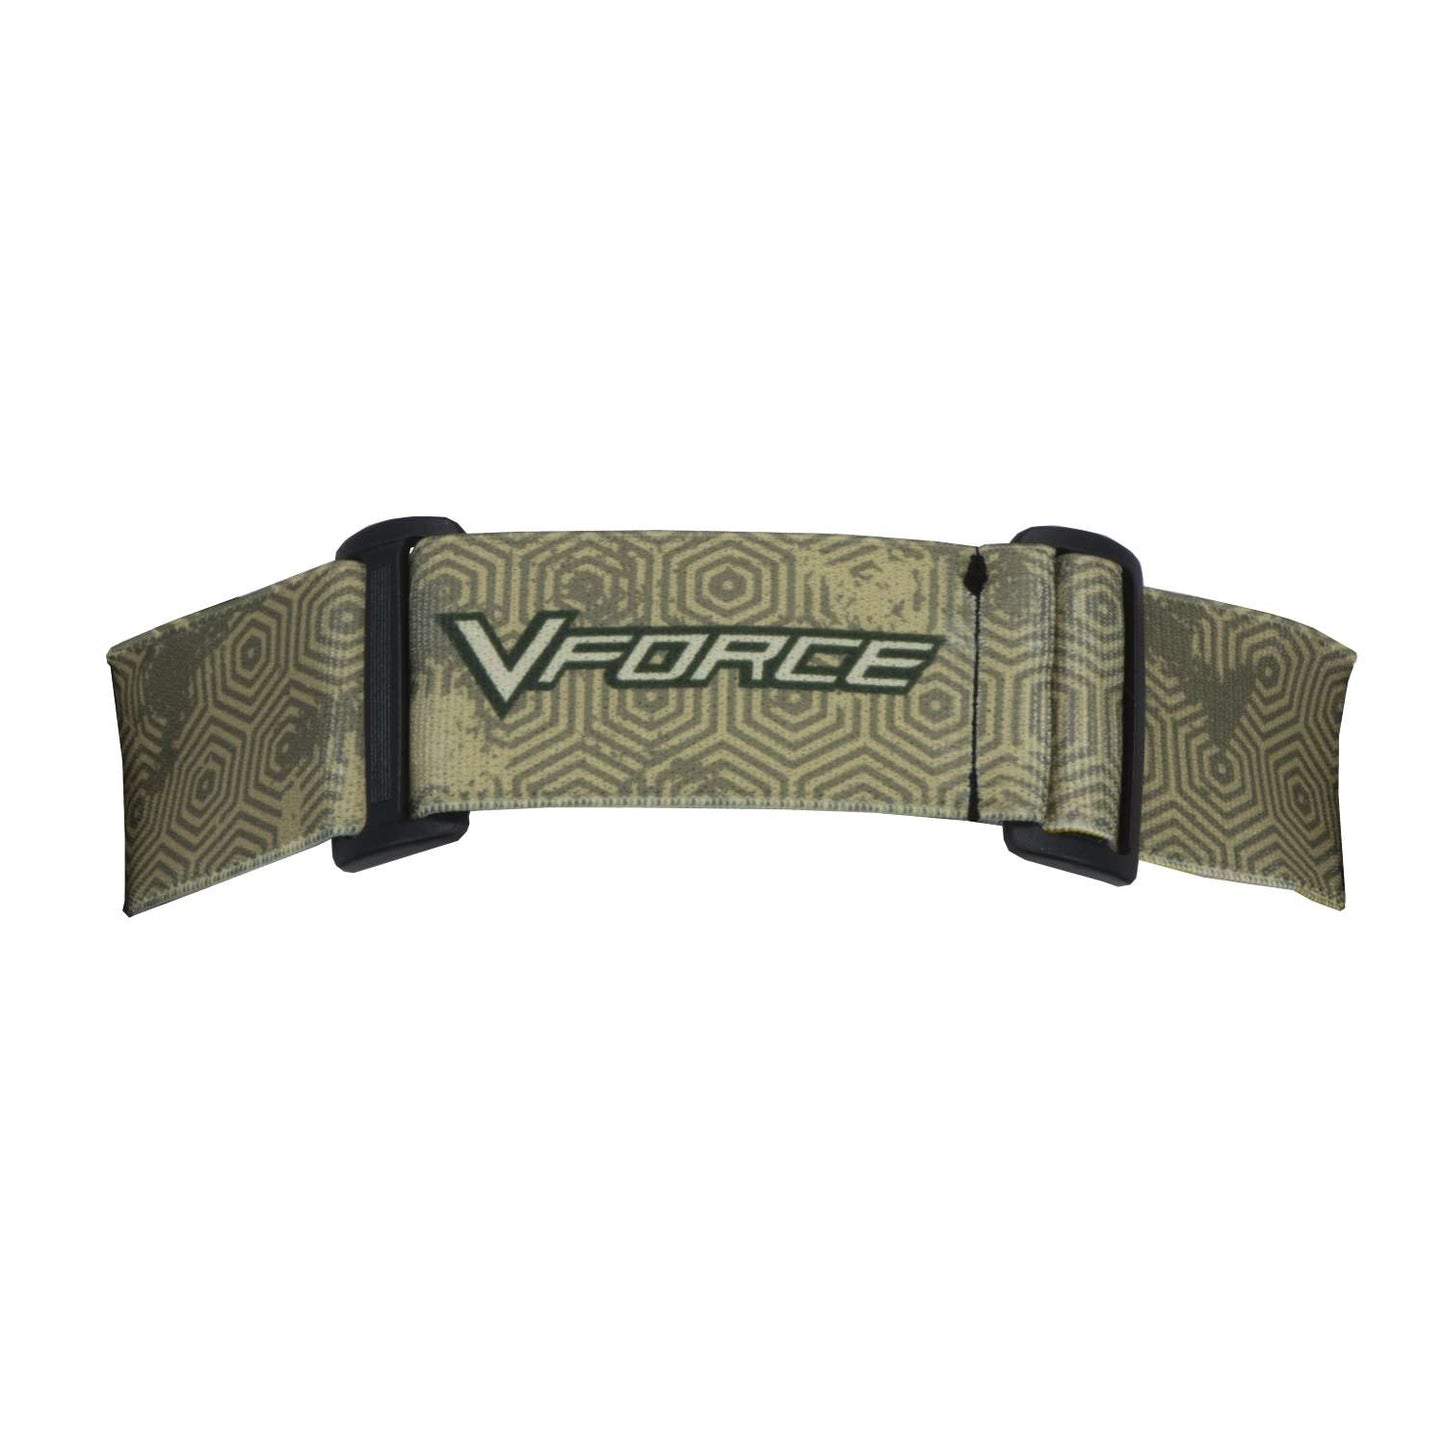 V-Force Grill SE Paintball Mask Goggle - Hexstreme Sand w/ Quicksilver HDR and Clear Lens